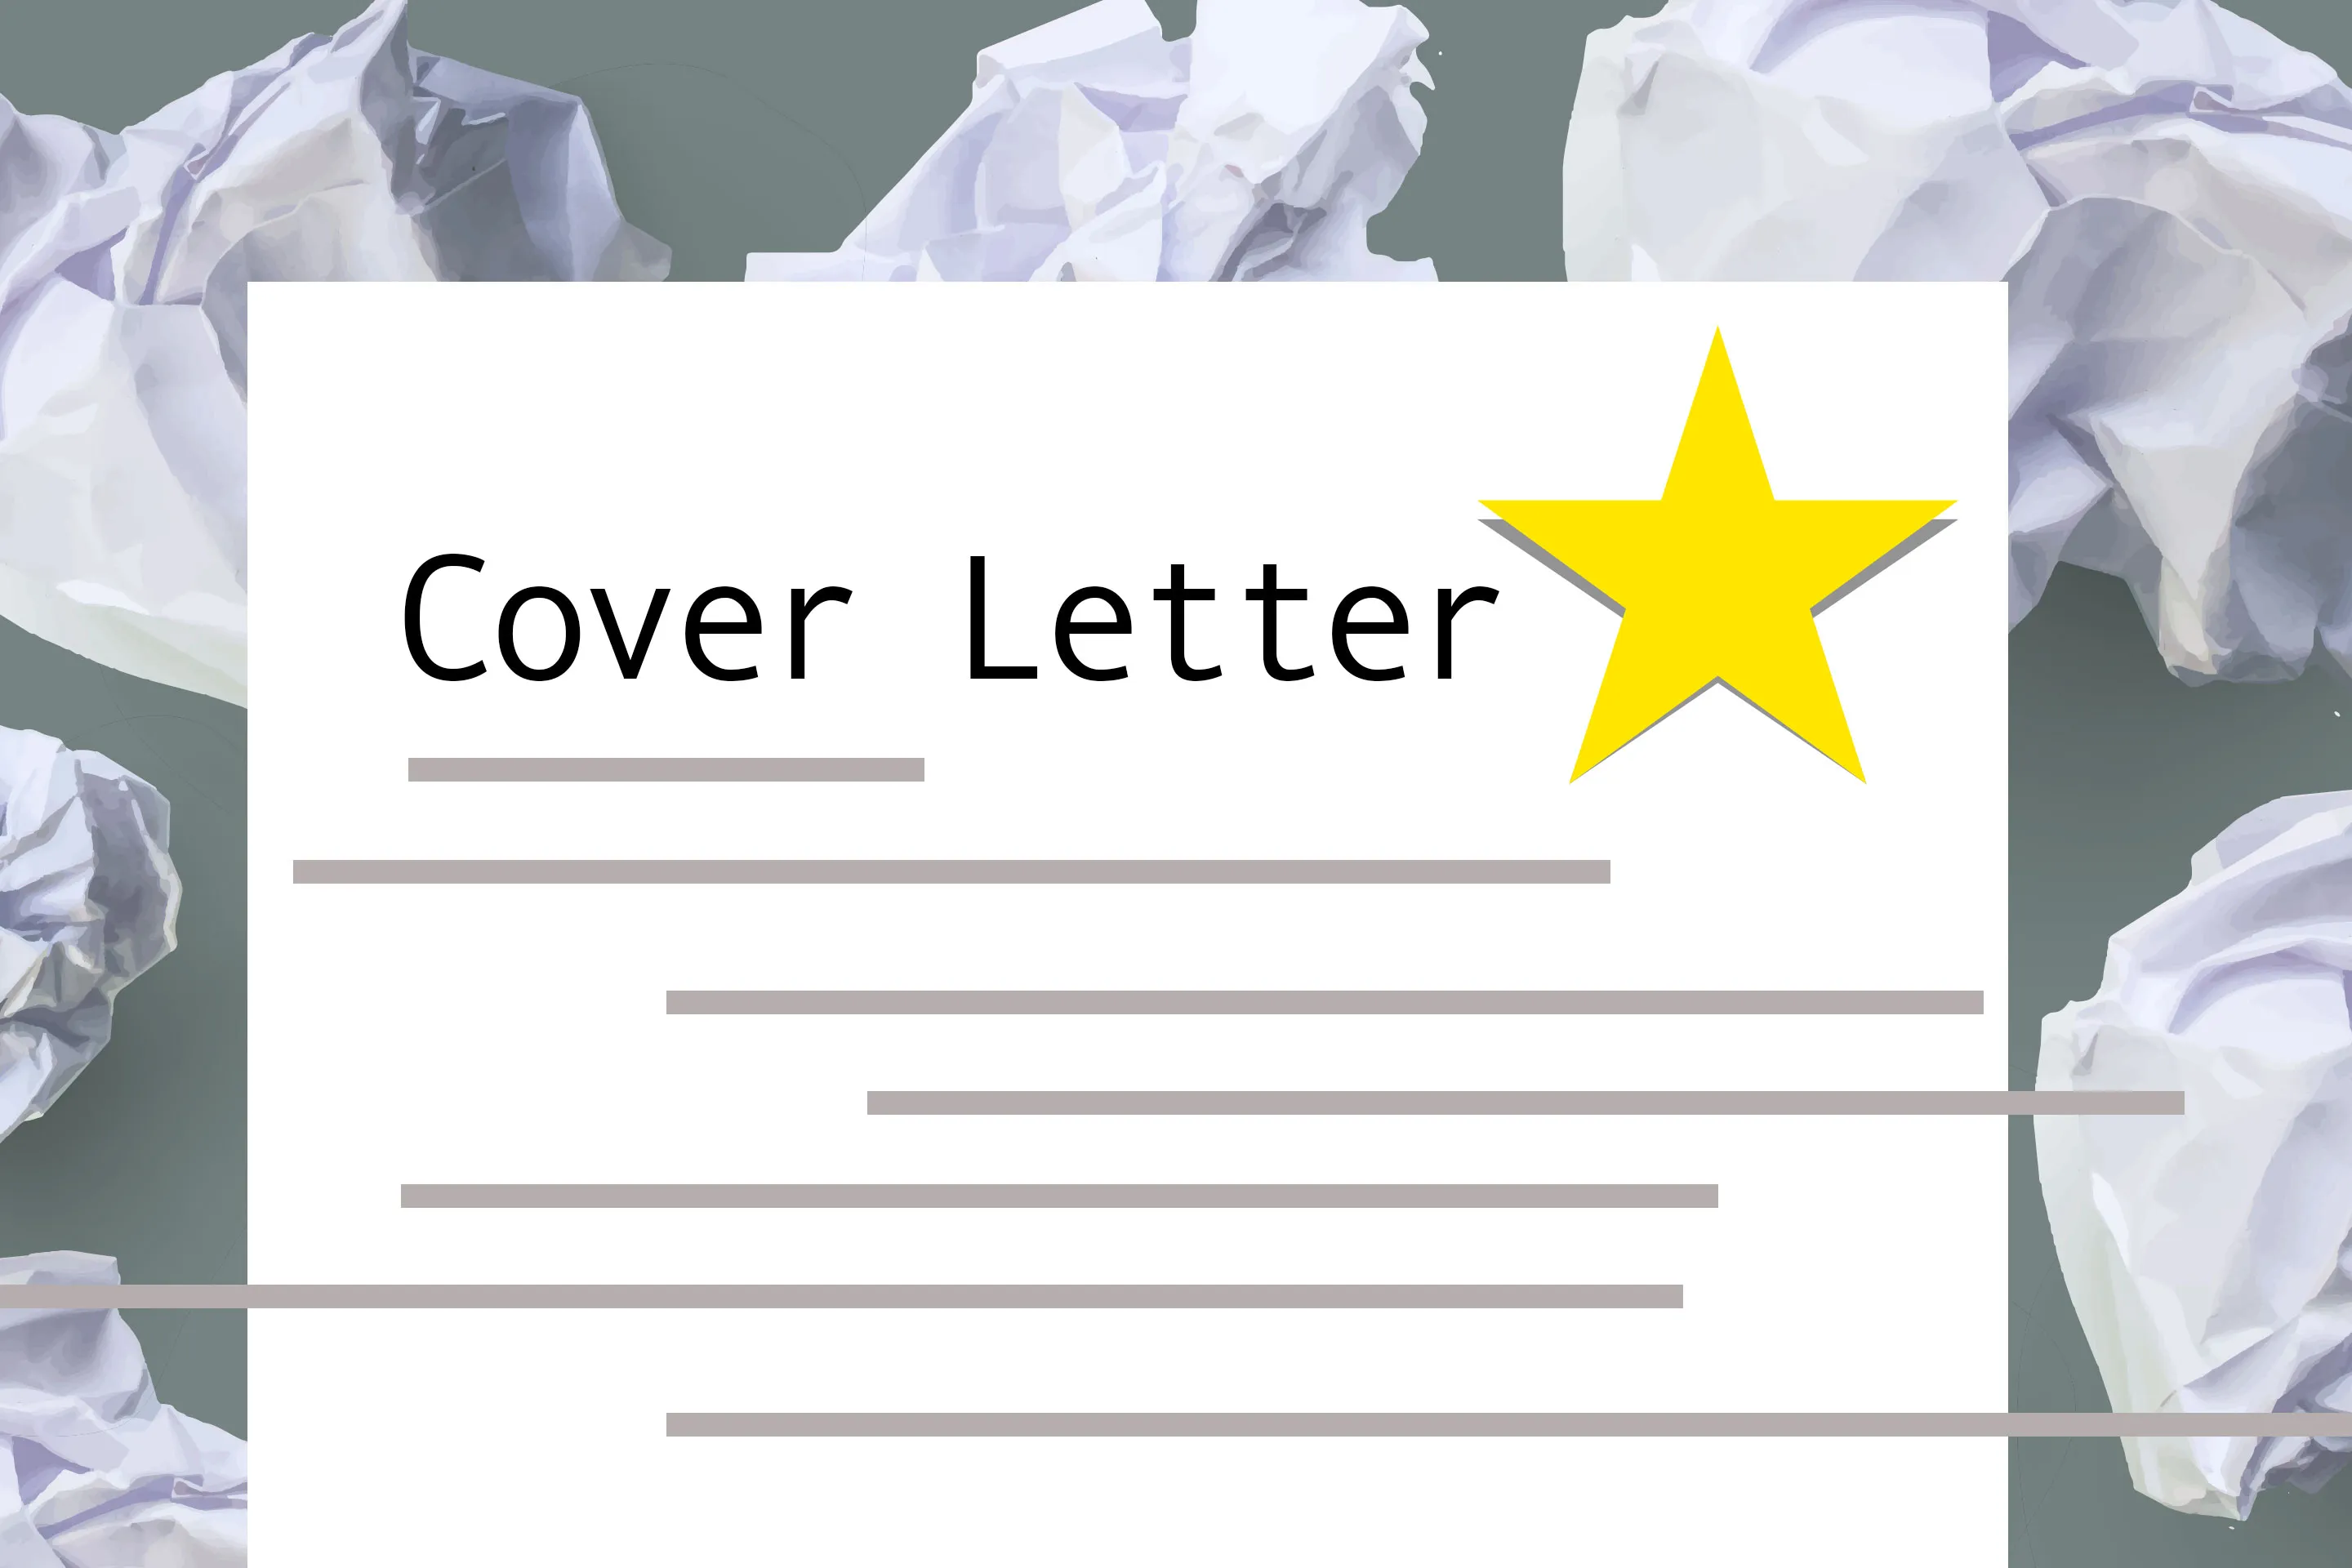 How To Write A Compelling Cover Letter For A Job Money